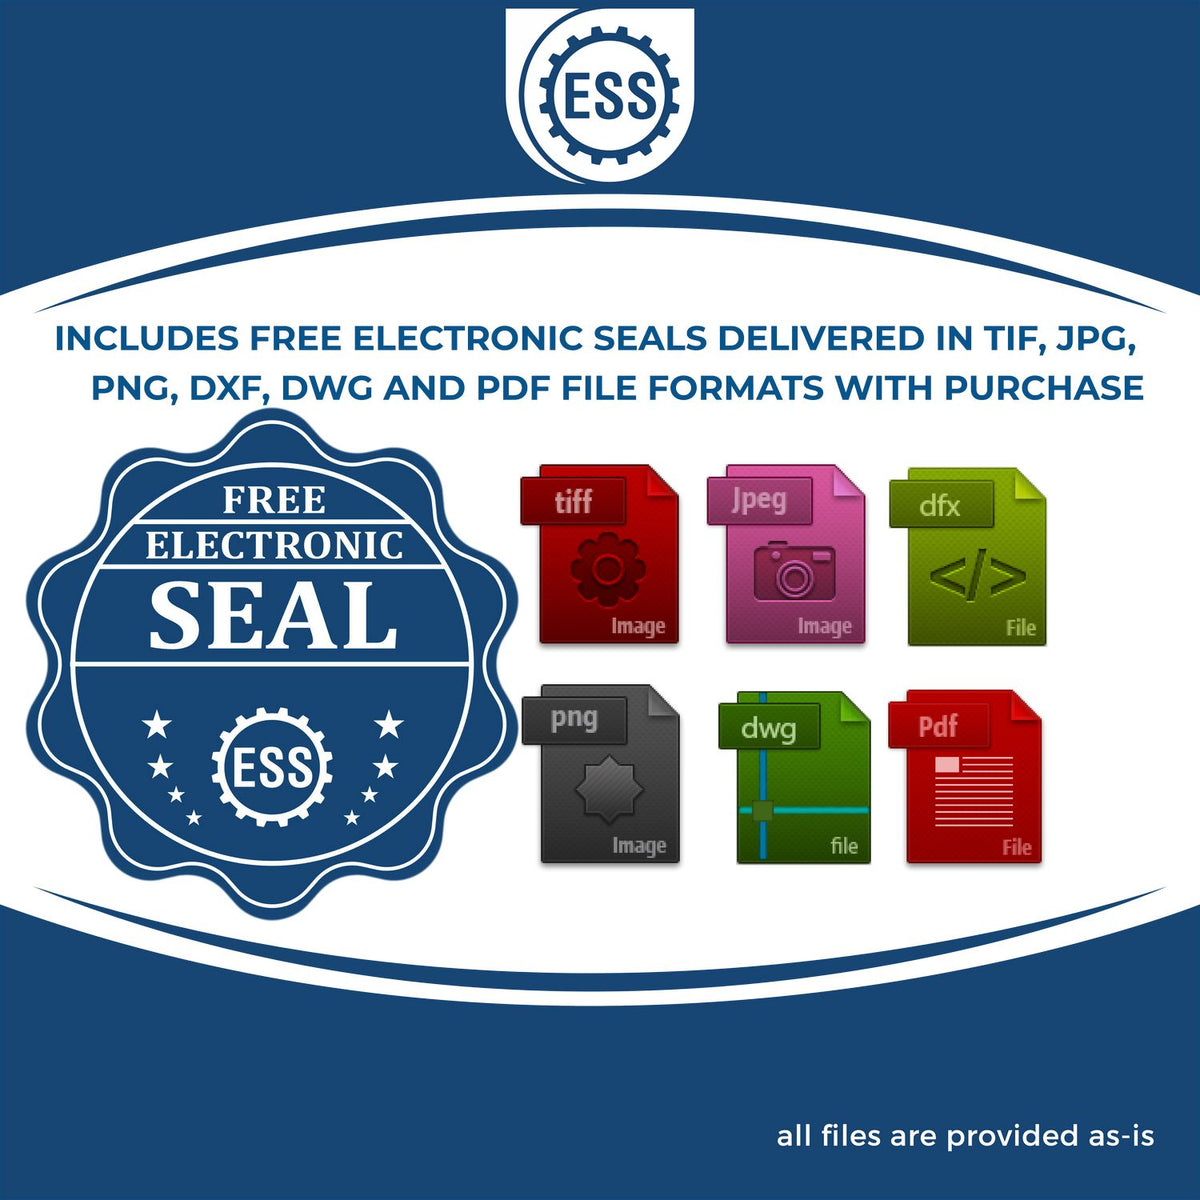 An infographic for the free electronic seal for the Slim Pre-Inked North Dakota Professional Engineer Seal Stamp illustrating the different file type icons such as DXF, DWG, TIF, JPG and PNG.